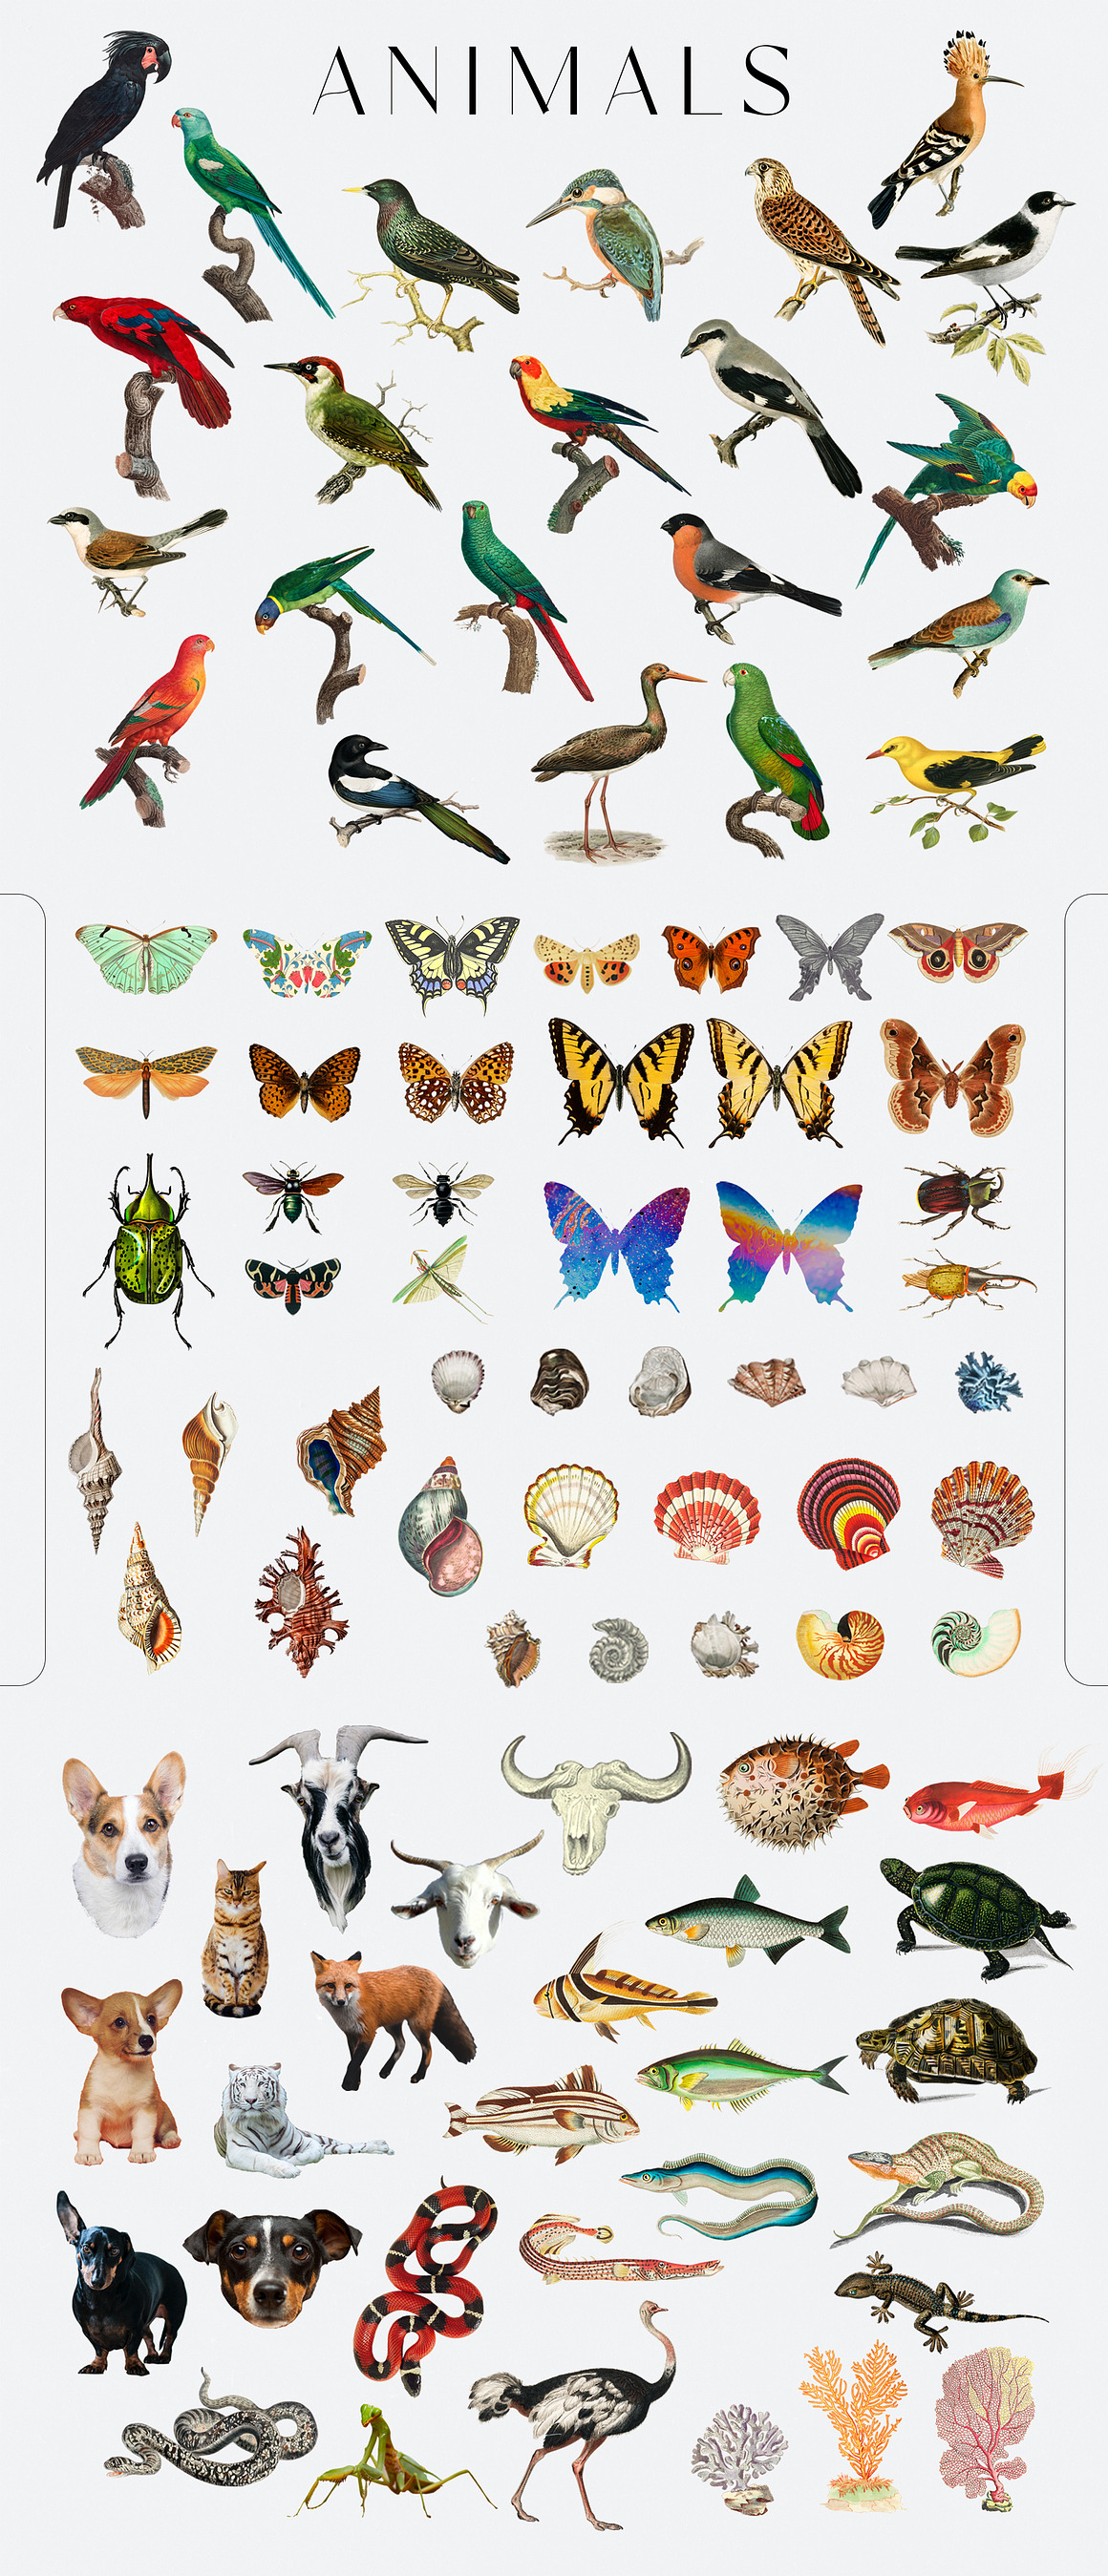 Sweven - Collage Creator, an Animal Illustration by SunnyAfternoons (Photo 5 of 16)